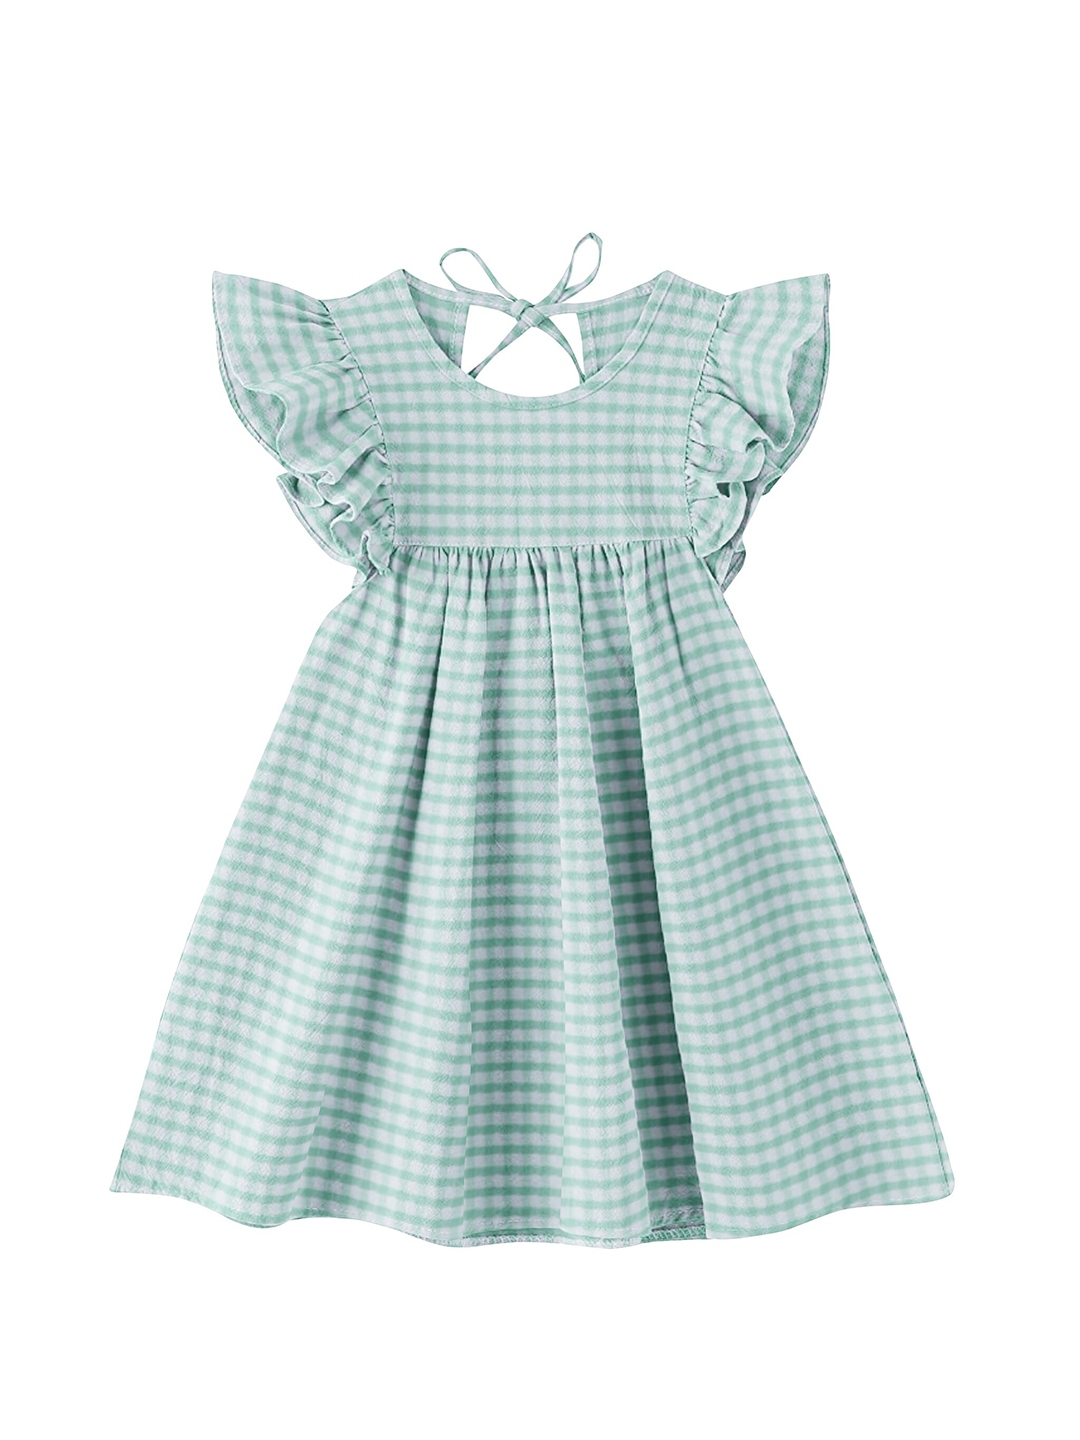 Buy THE BABY ATELIER Girls Green Checked Pure Cotton Nightdress ...